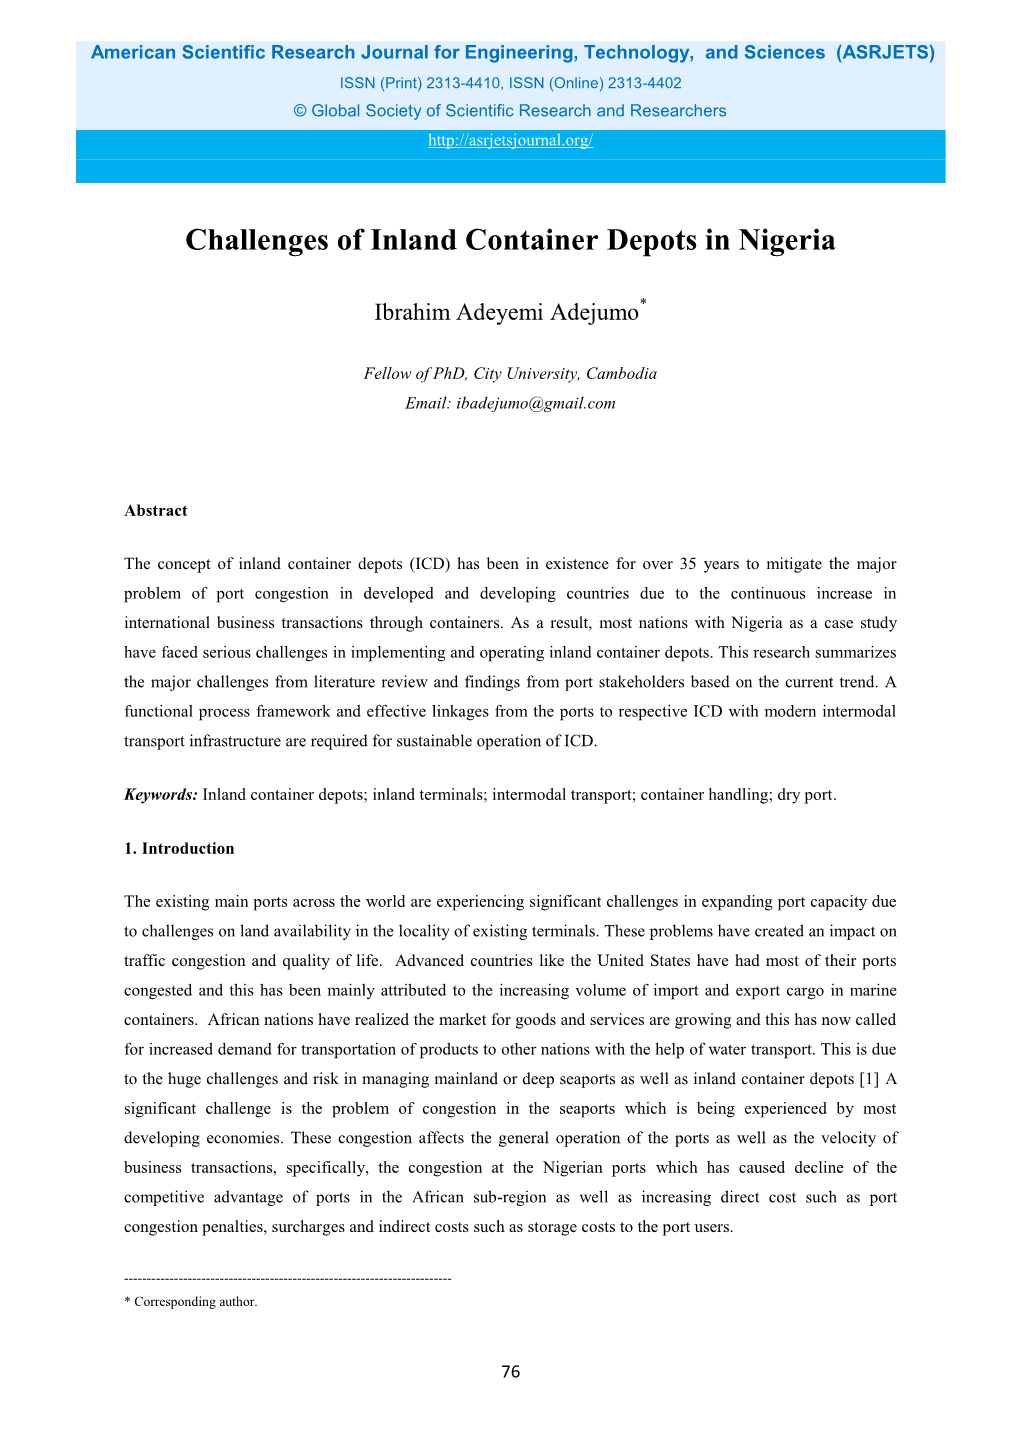 Challenges of Inland Container Depots in Nigeria